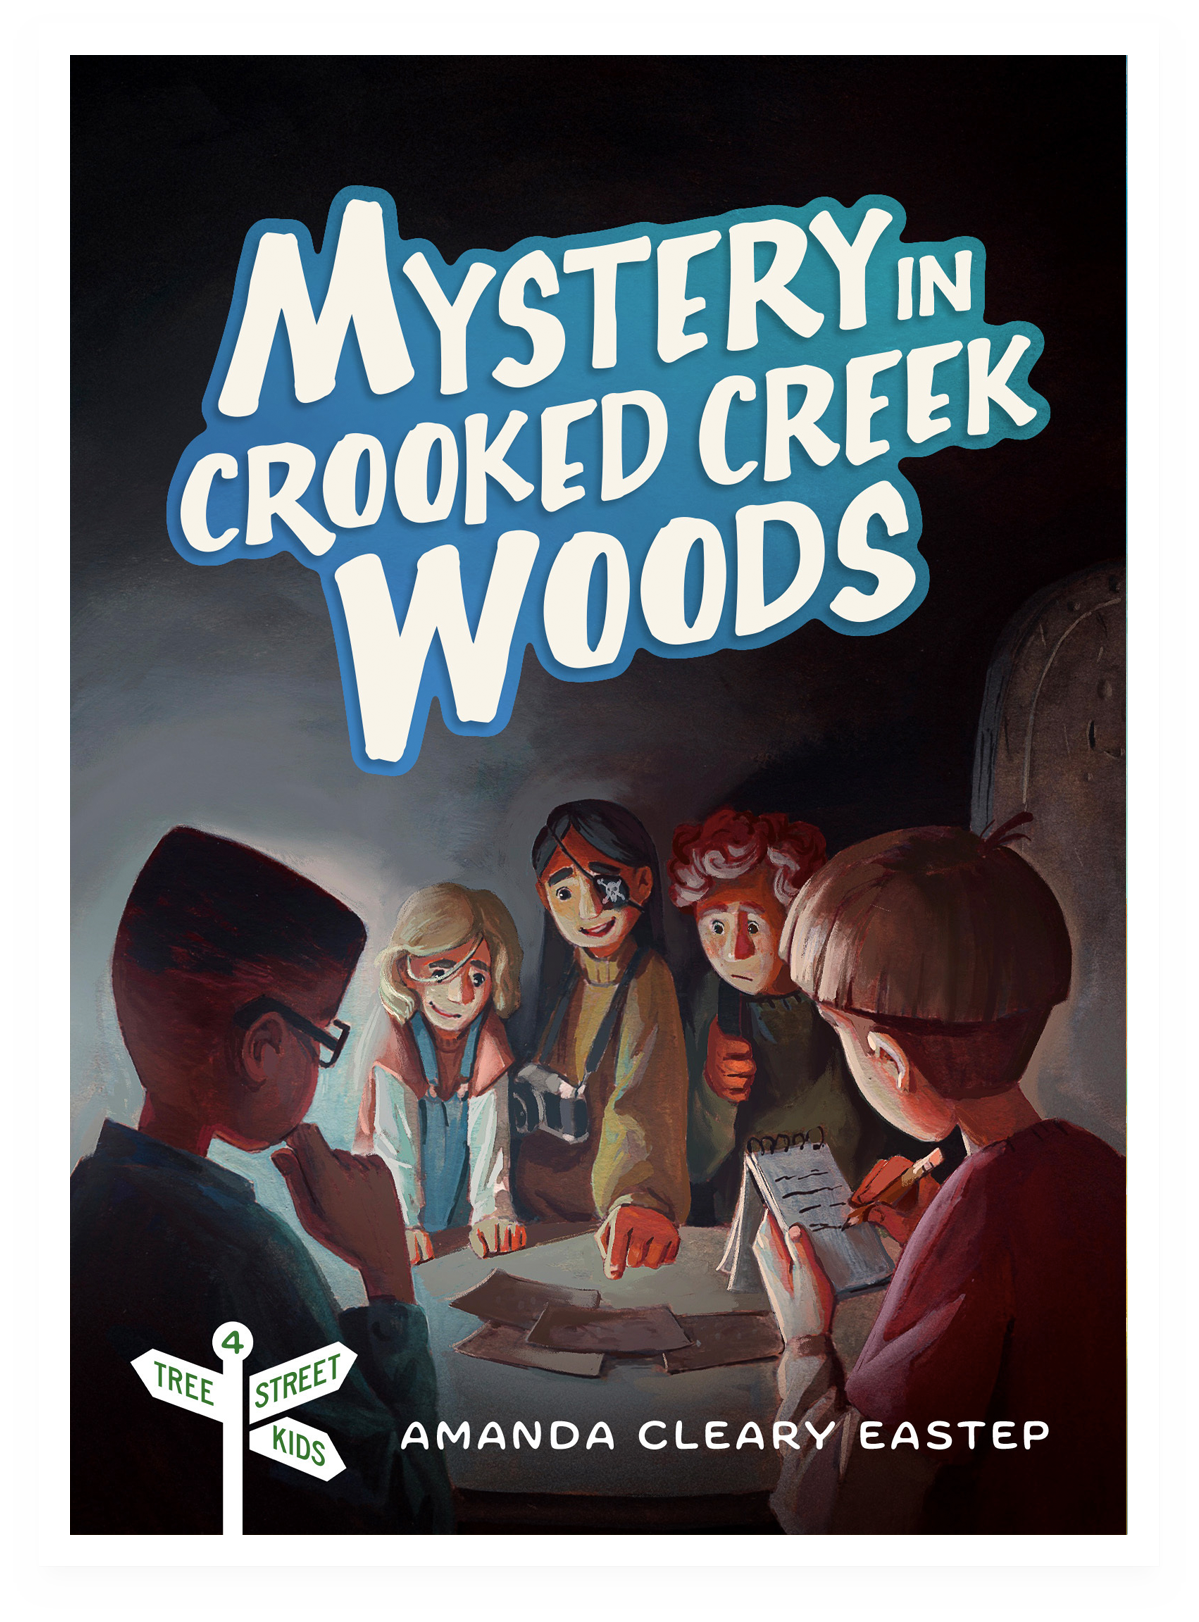 Mystery in crooked creek woods book